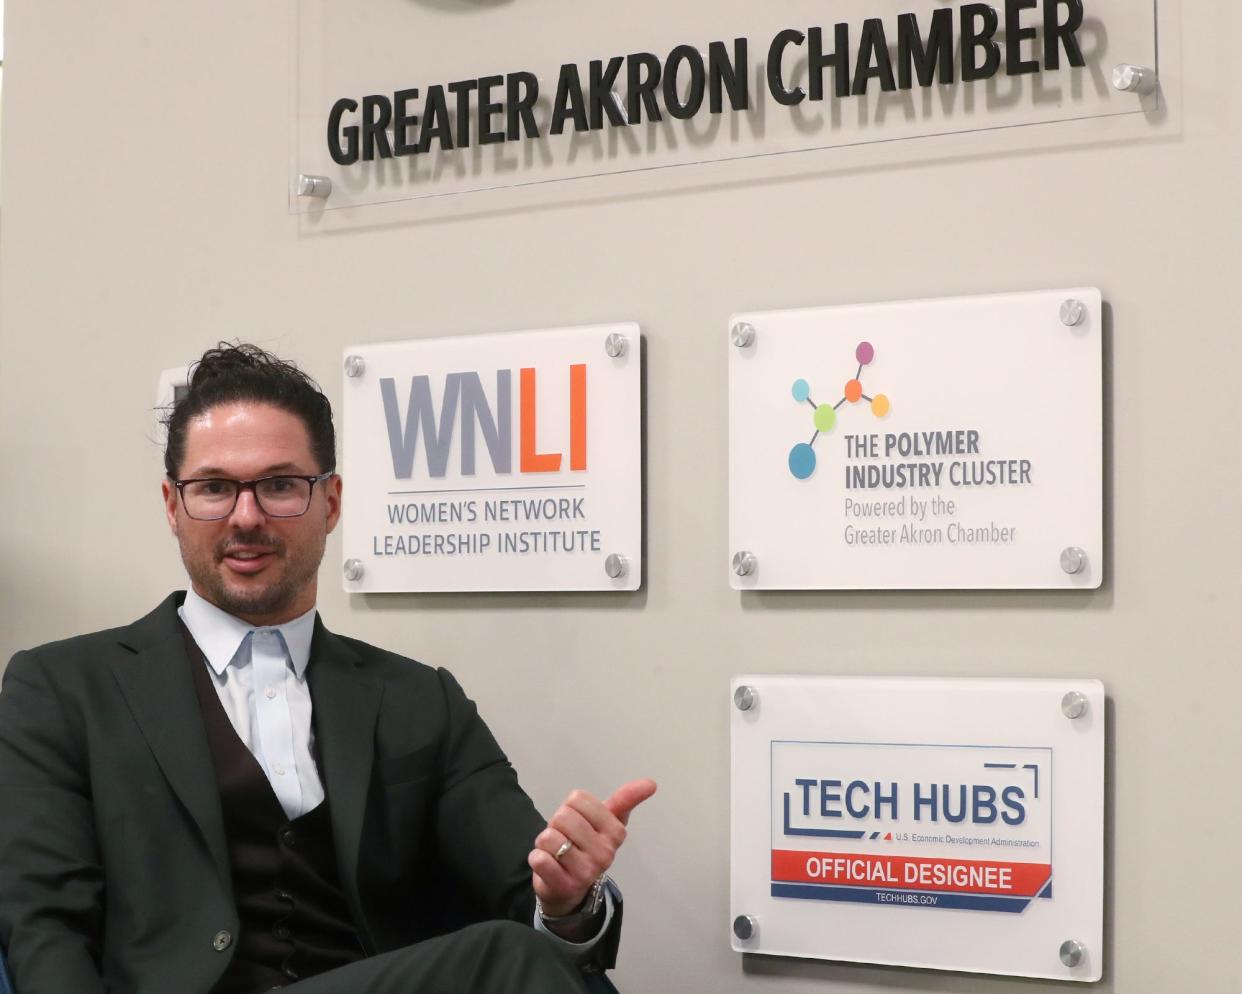 Brian Anderson is leading the polymer cluster out of the Greater Akron Chamber of Commerce.